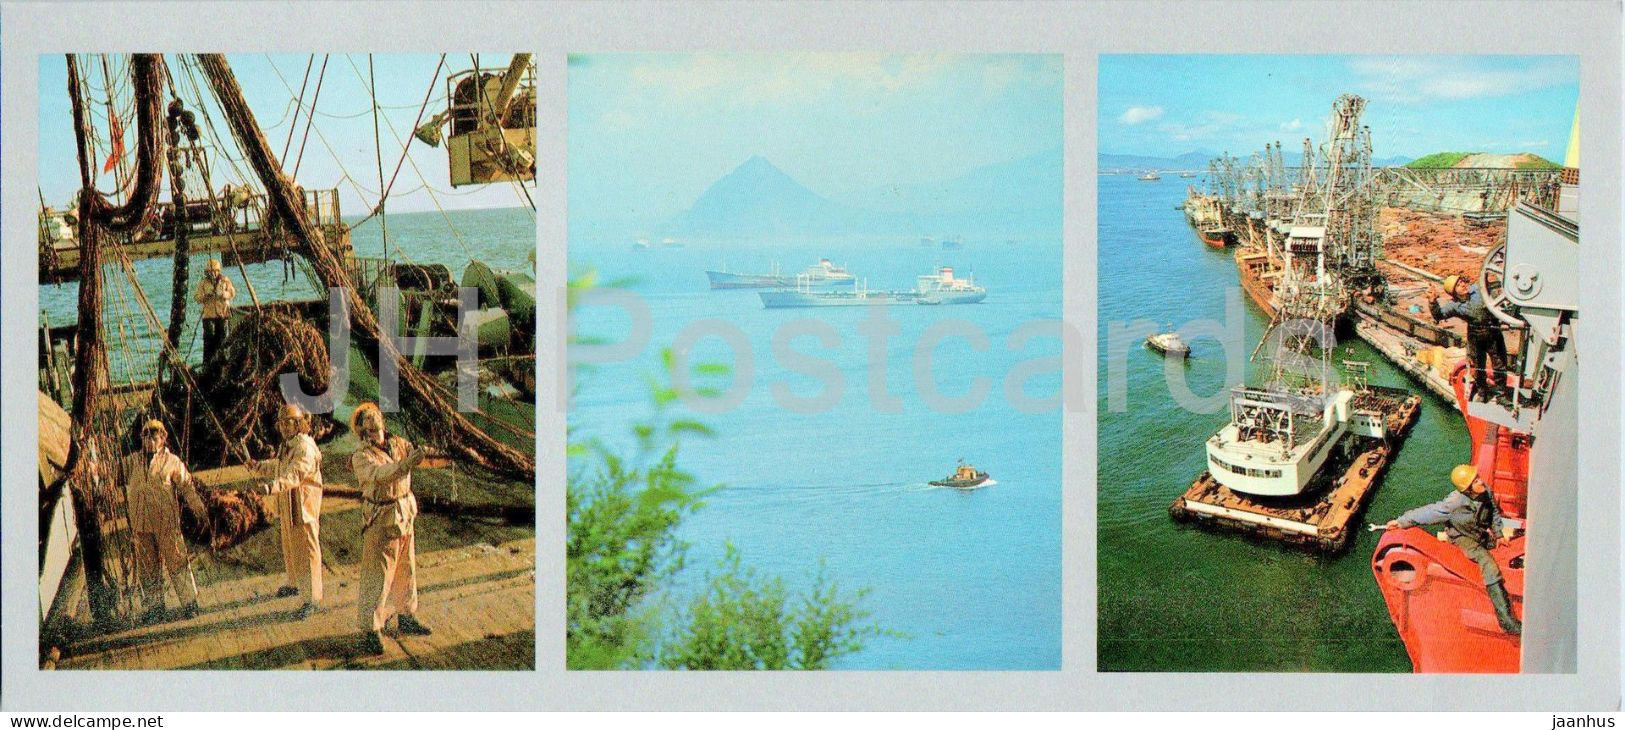 Bay Of The Peter The Great - Nakhodka - Port - Ship - 1980 - Russia USSR - Unused - Russland